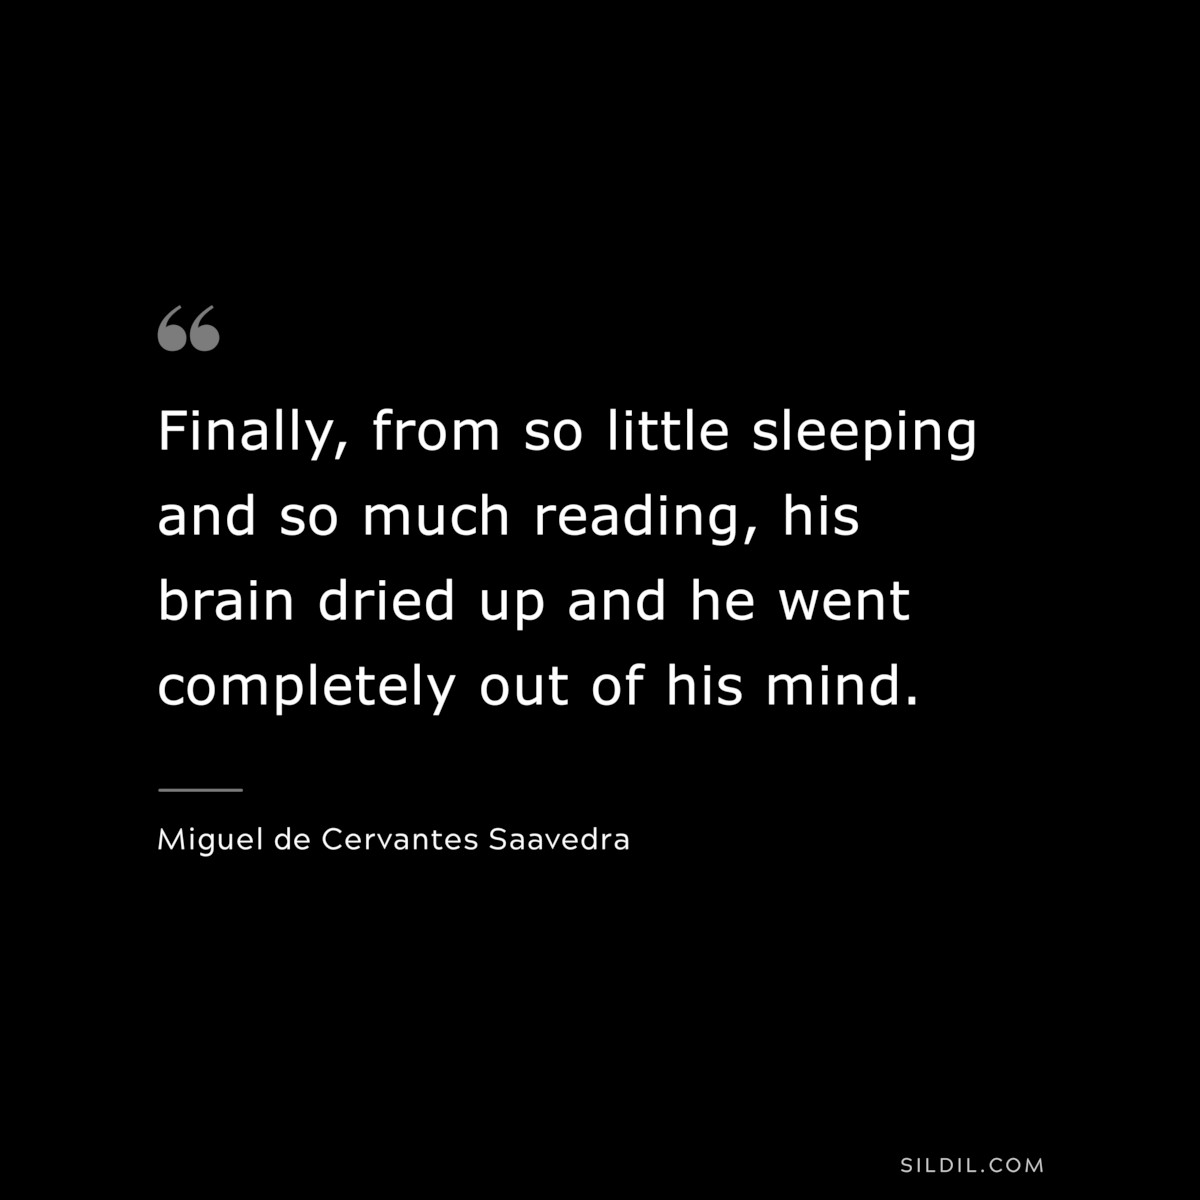 Finally, from so little sleeping and so much reading, his brain dried up and he went completely out of his mind. ― Miguel de Cervantes Saavedra